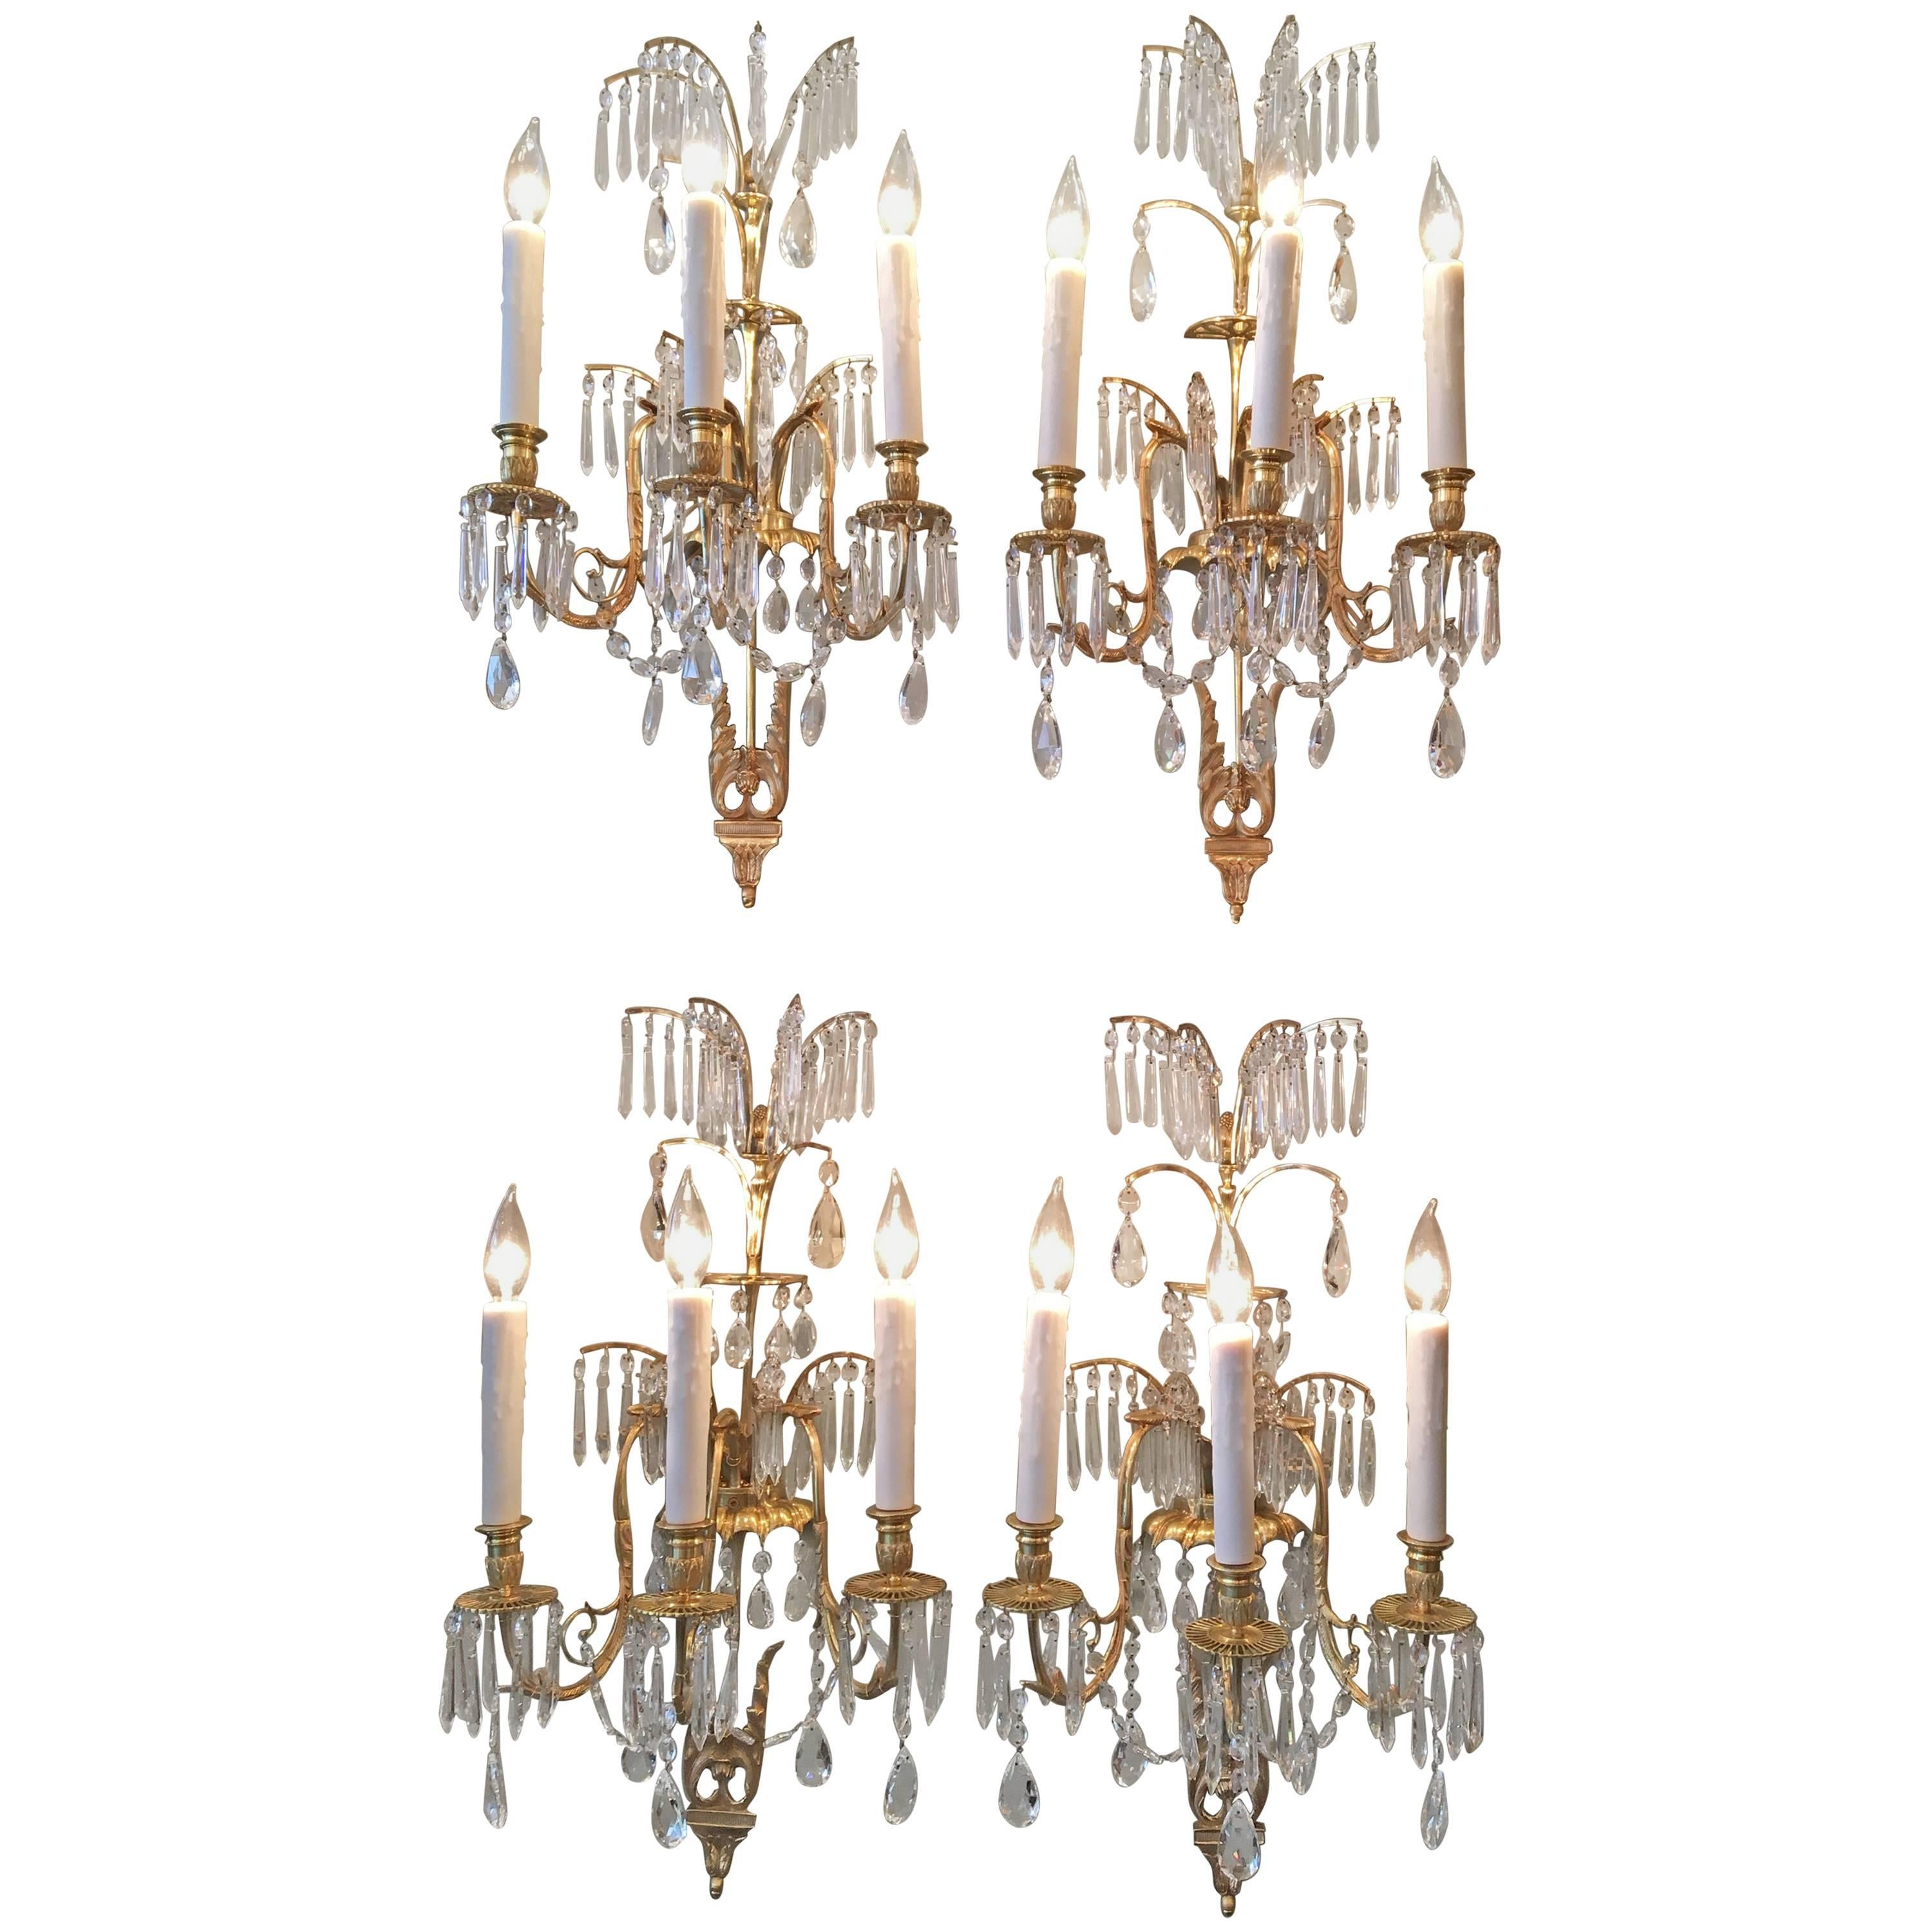 19th Century Russian Imperial Style Sconces